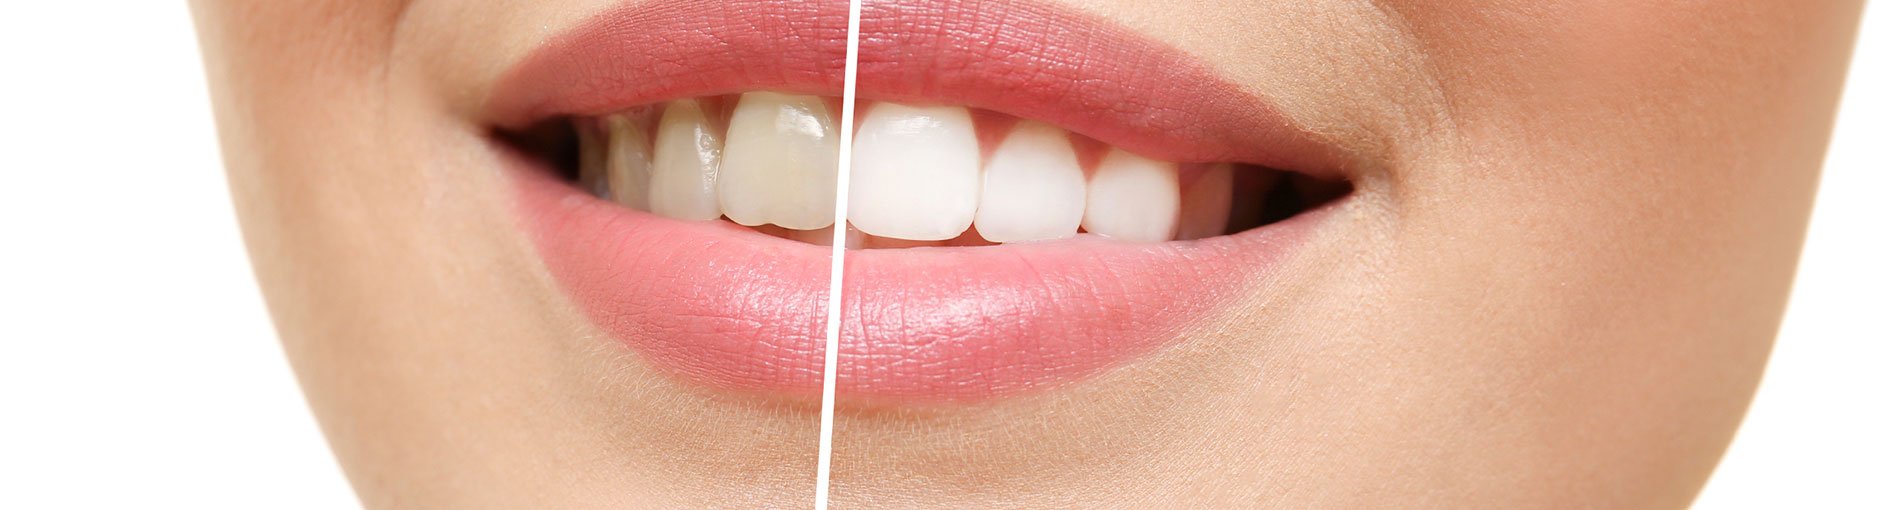 teeth whitening before and after smile